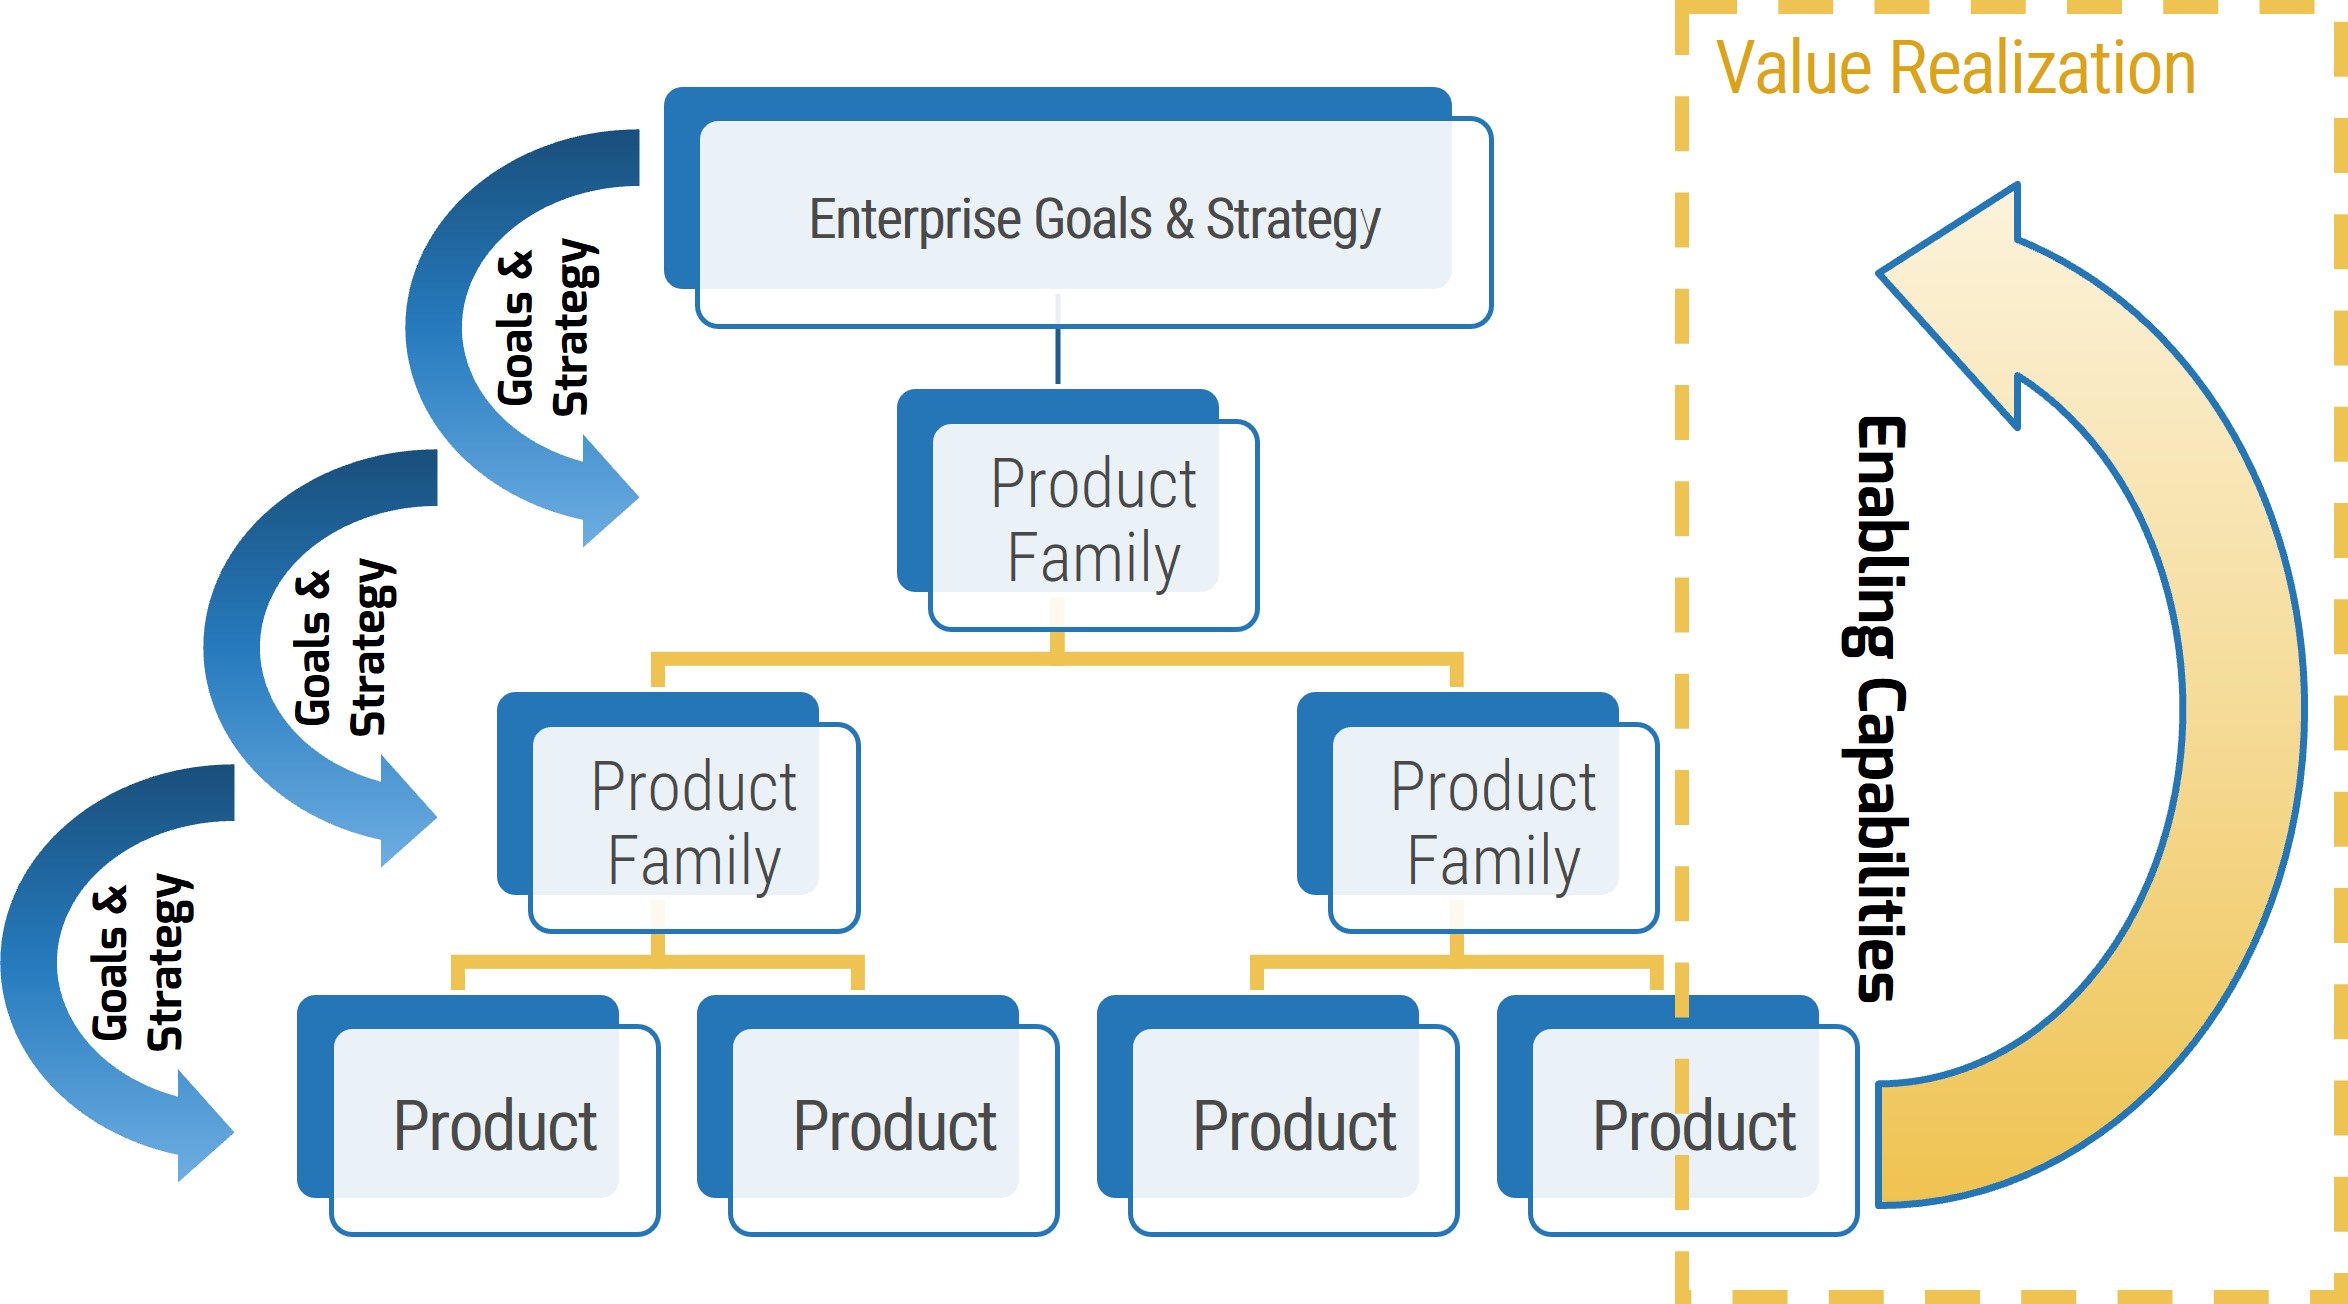 An example is shown to demonstrate product-to-family-alignment.